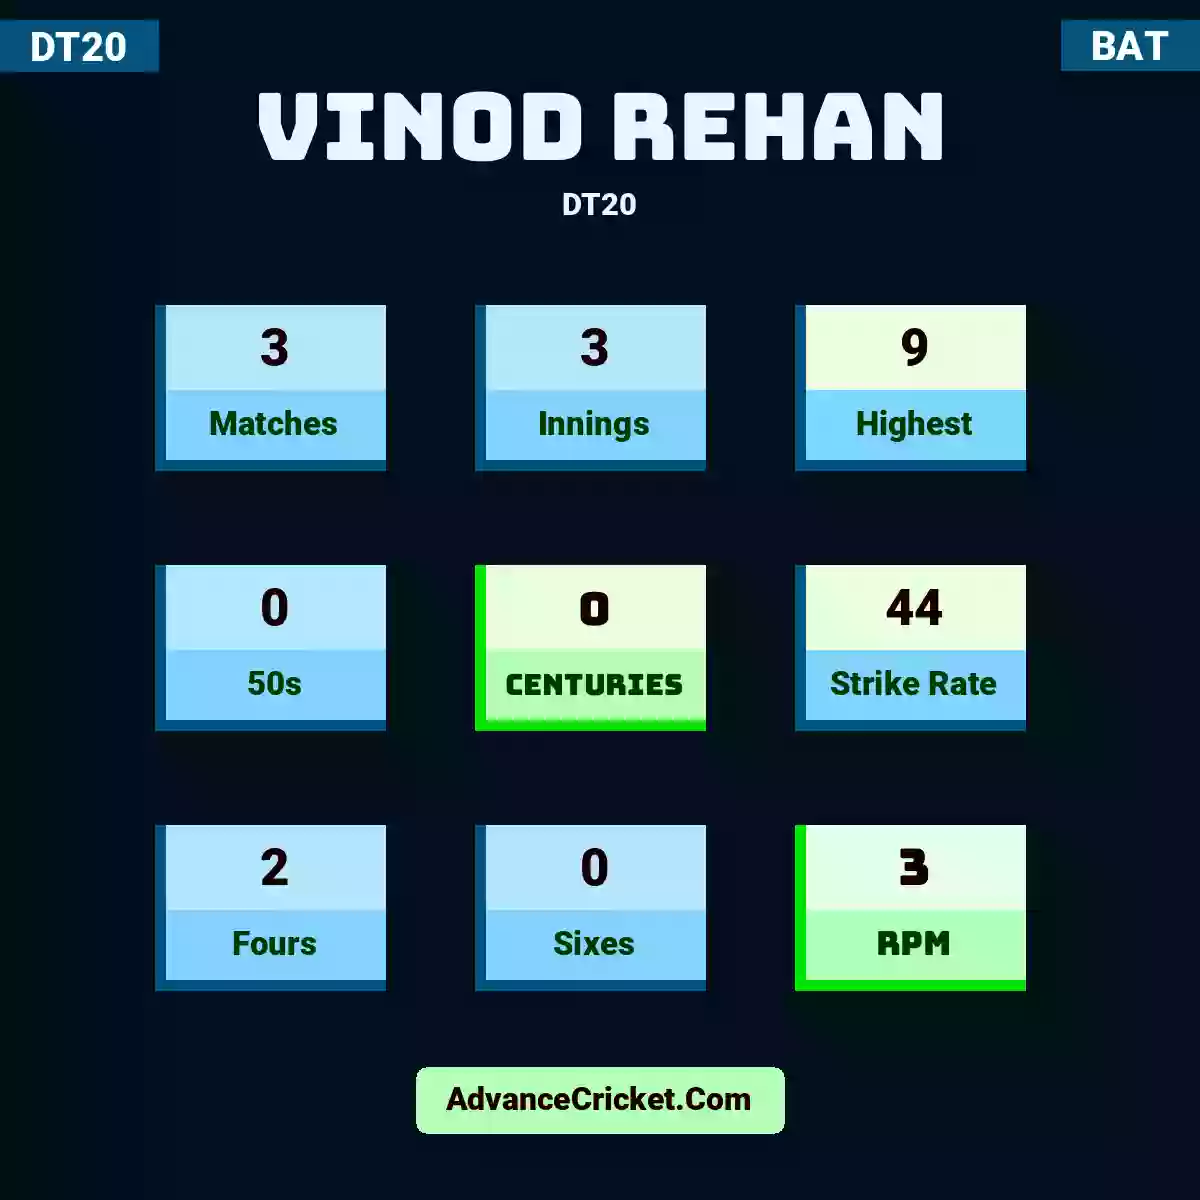 Vinod Rehan DT20 , Vinod Rehan played 3 matches, scored 9 runs as highest, 0 half-centuries, and 0 centuries, with a strike rate of 44. V.Rehan hit 2 fours and 0 sixes, with an RPM of 3.